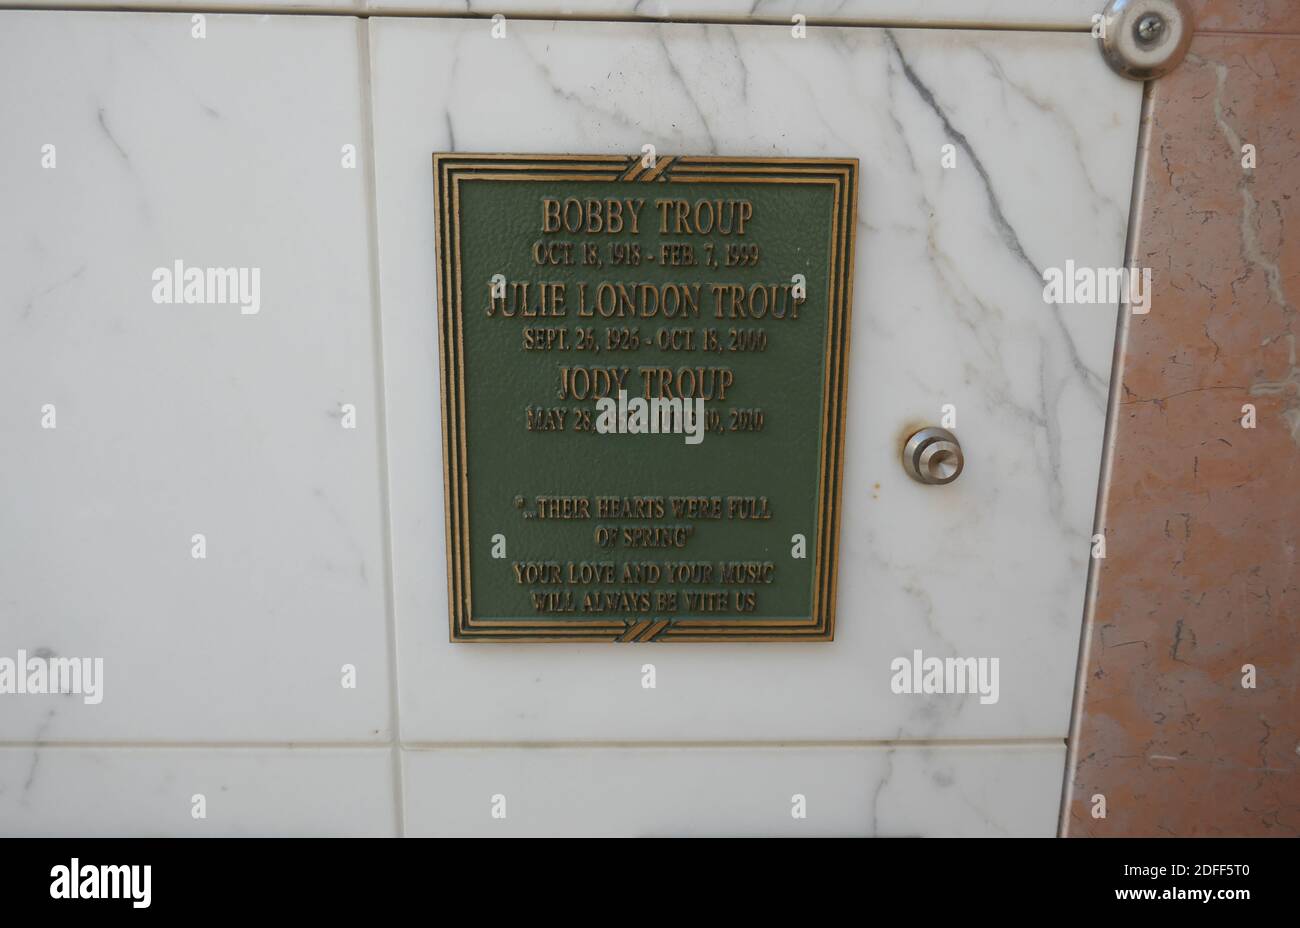 Los Angeles, California, USA 3rd December 2020 A general view of atmosphere of actor Bobby Troup's Grave and singer Julie London's grave at Forest Lawn Memorial Park Hollywood Hills on December 3, 2020 in Los Angeles, California, USA. Photo by Barry King/Alamy Stock Photo Stock Photo